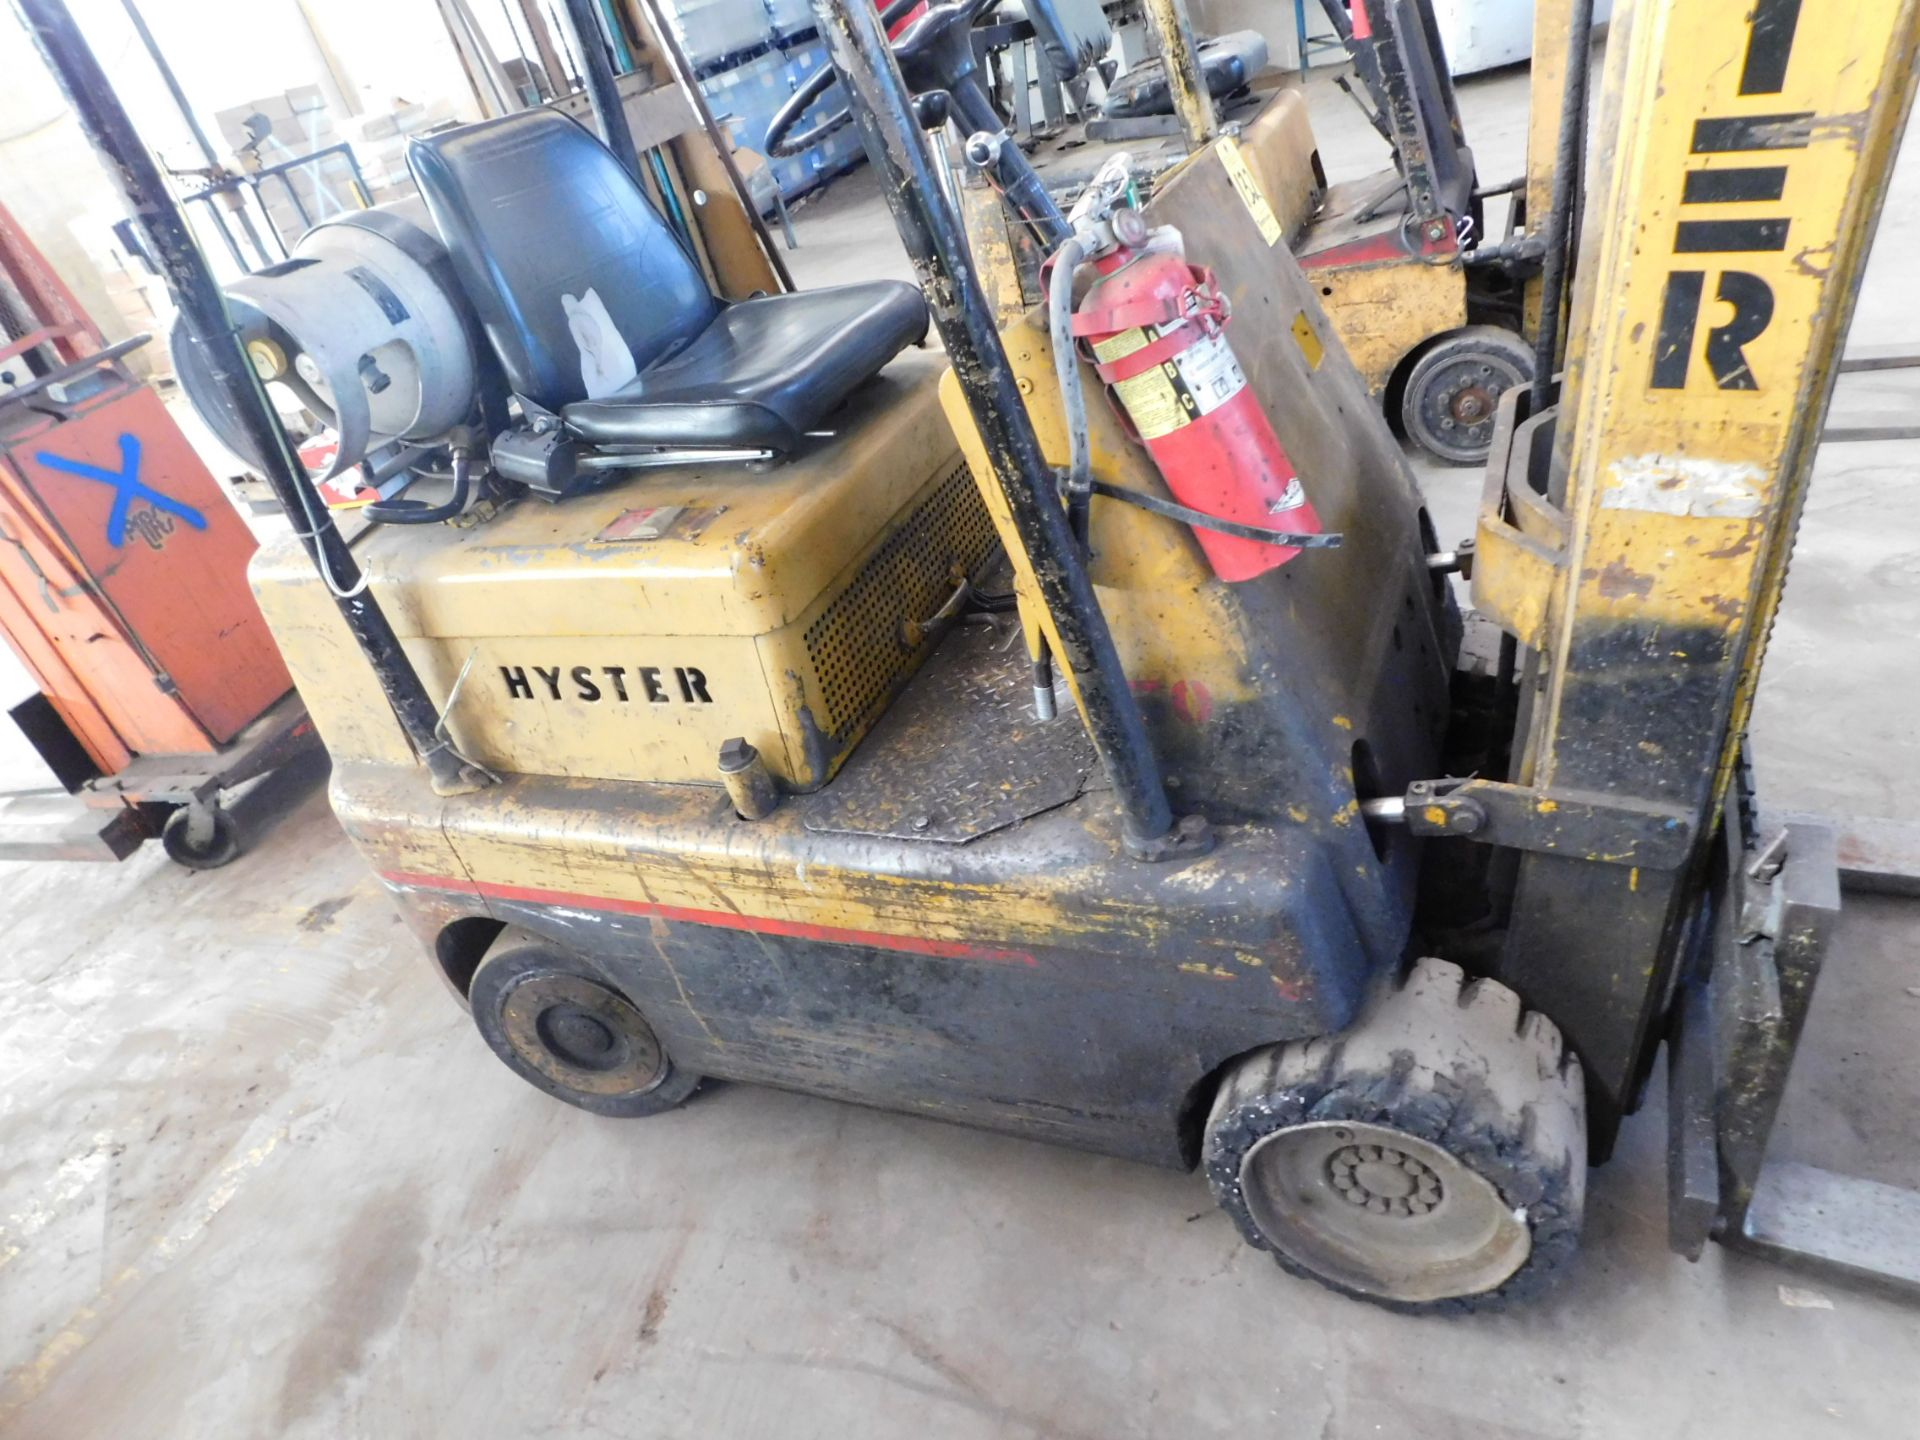 Hyster Model 50 Fork Lift, s/n Unknown, 5,000 Lb. Capacity, 3-Stage Mast, 42" Forks, Hard Tire, - Image 3 of 9